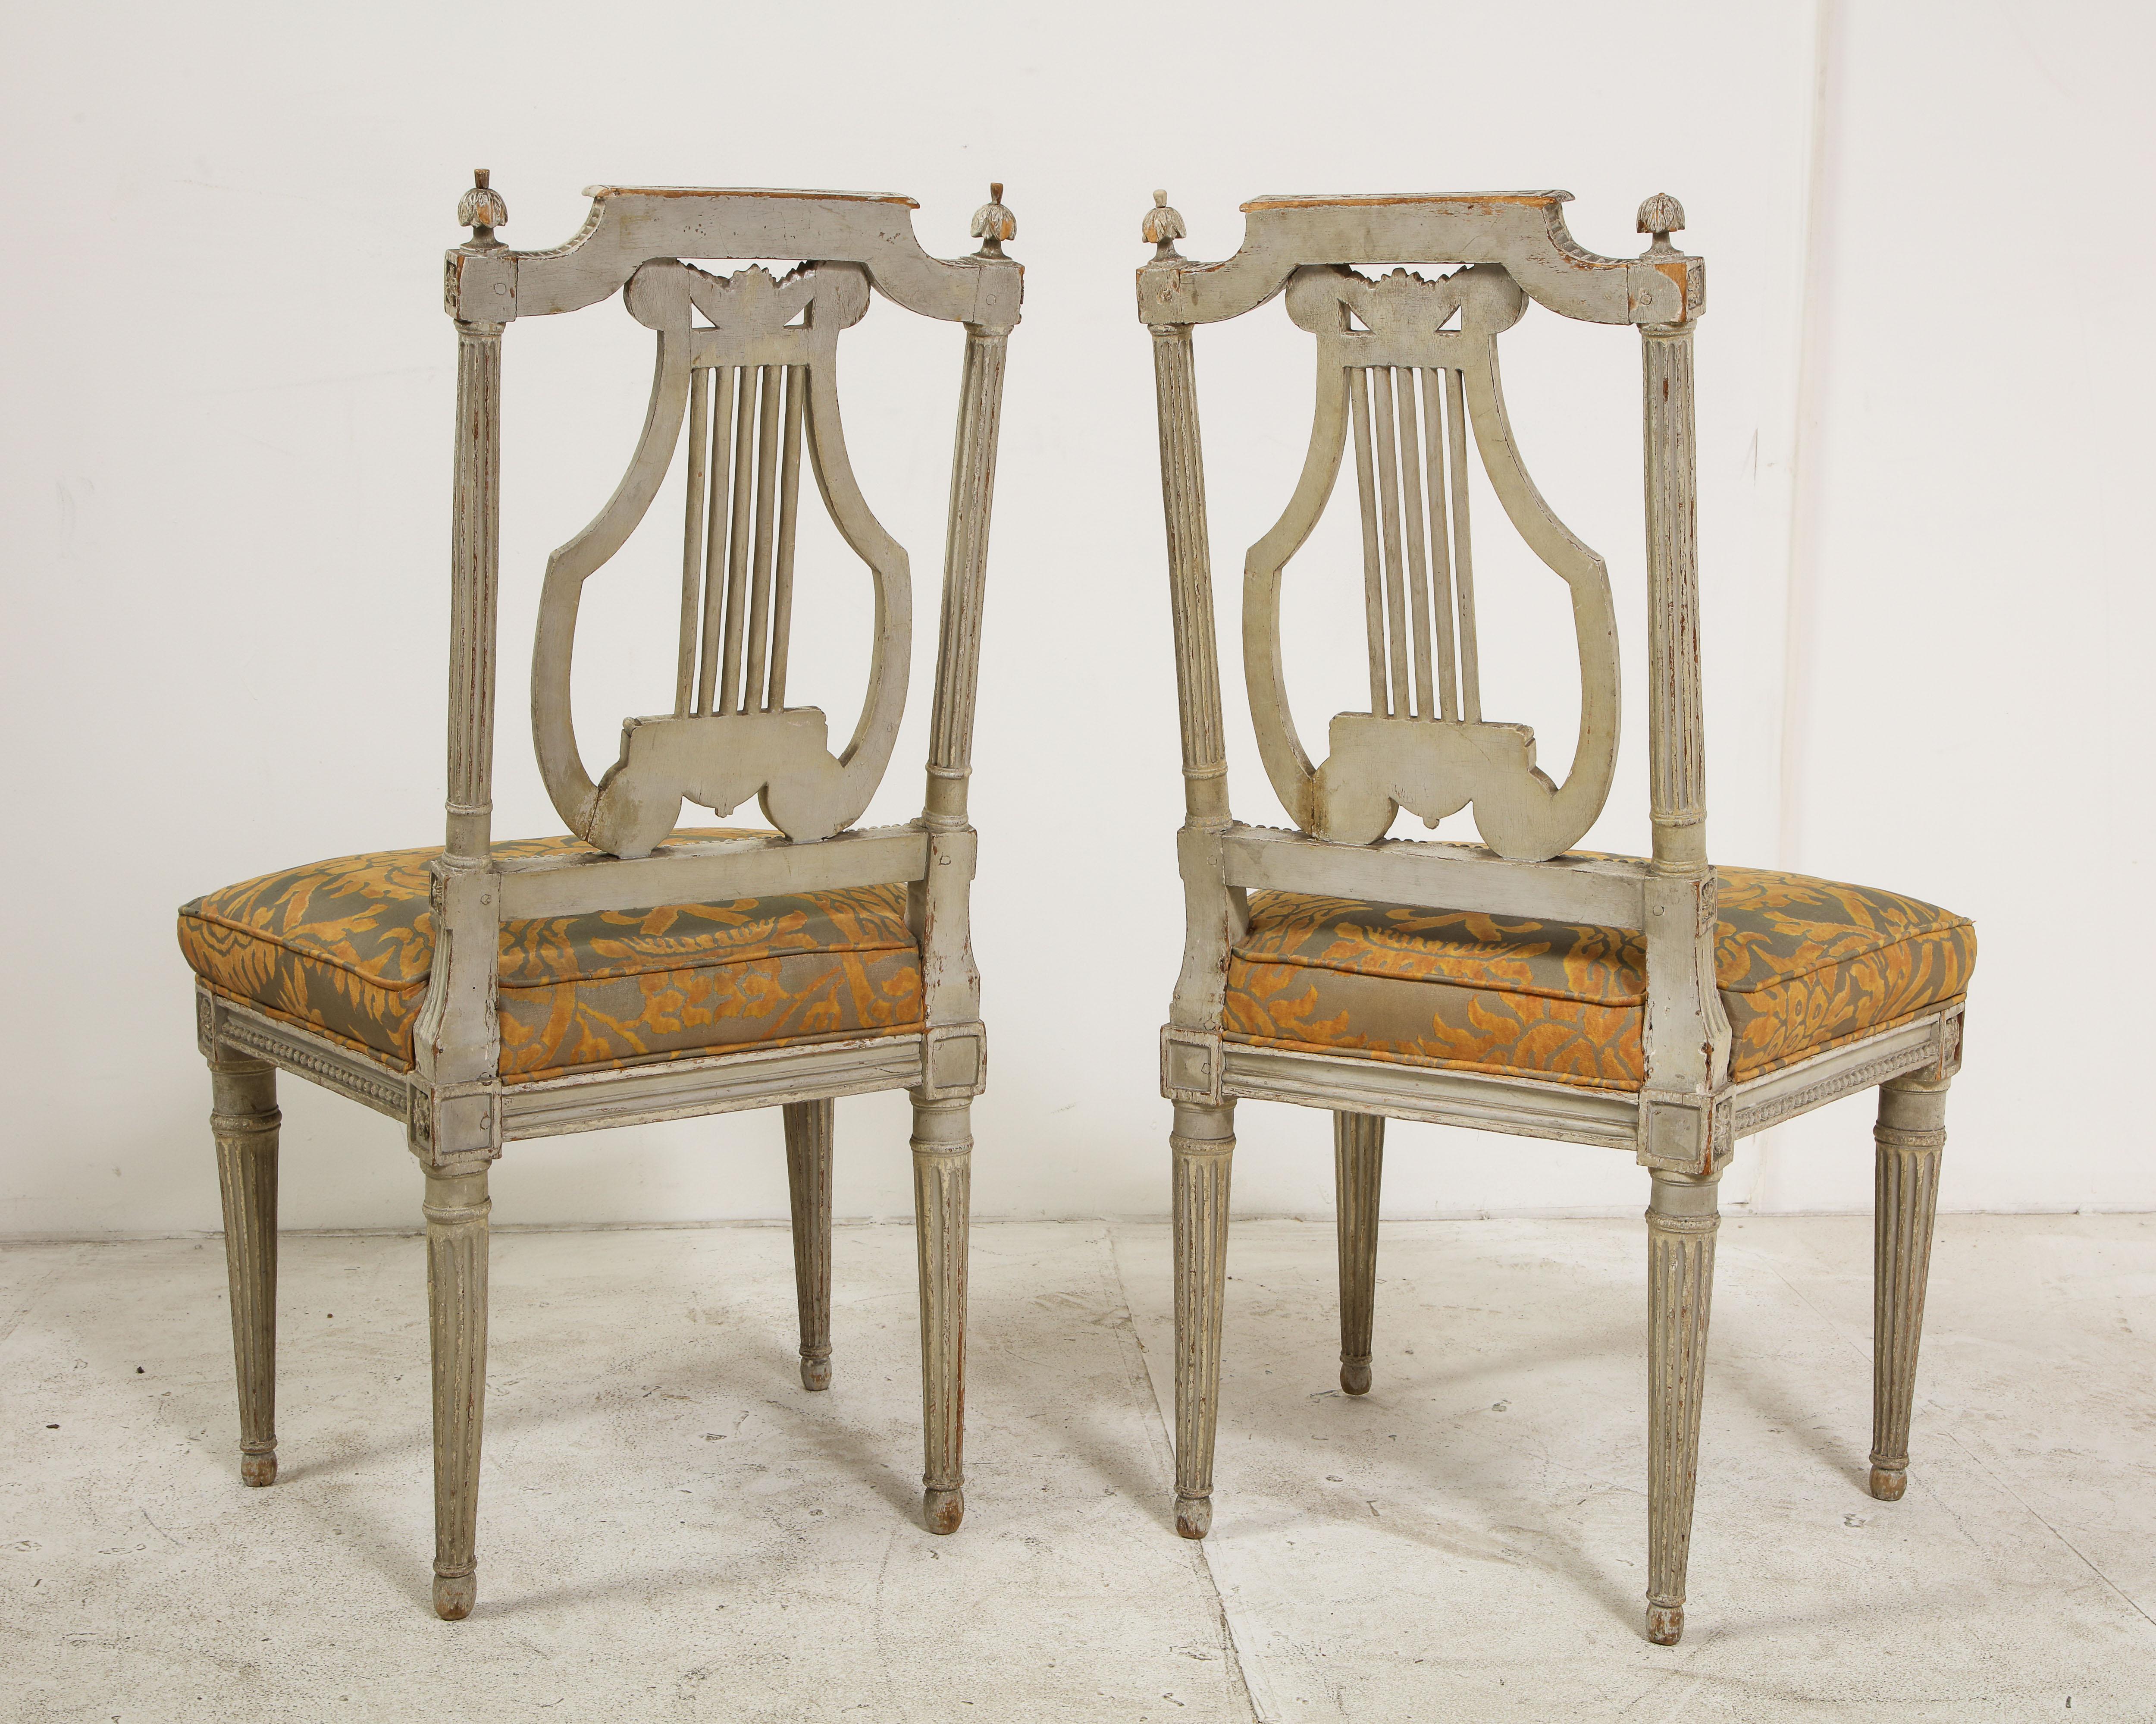 Pair of 19th Century Italian Painted Lyre-Back Chairs with Fortuny Seat Cushions 1